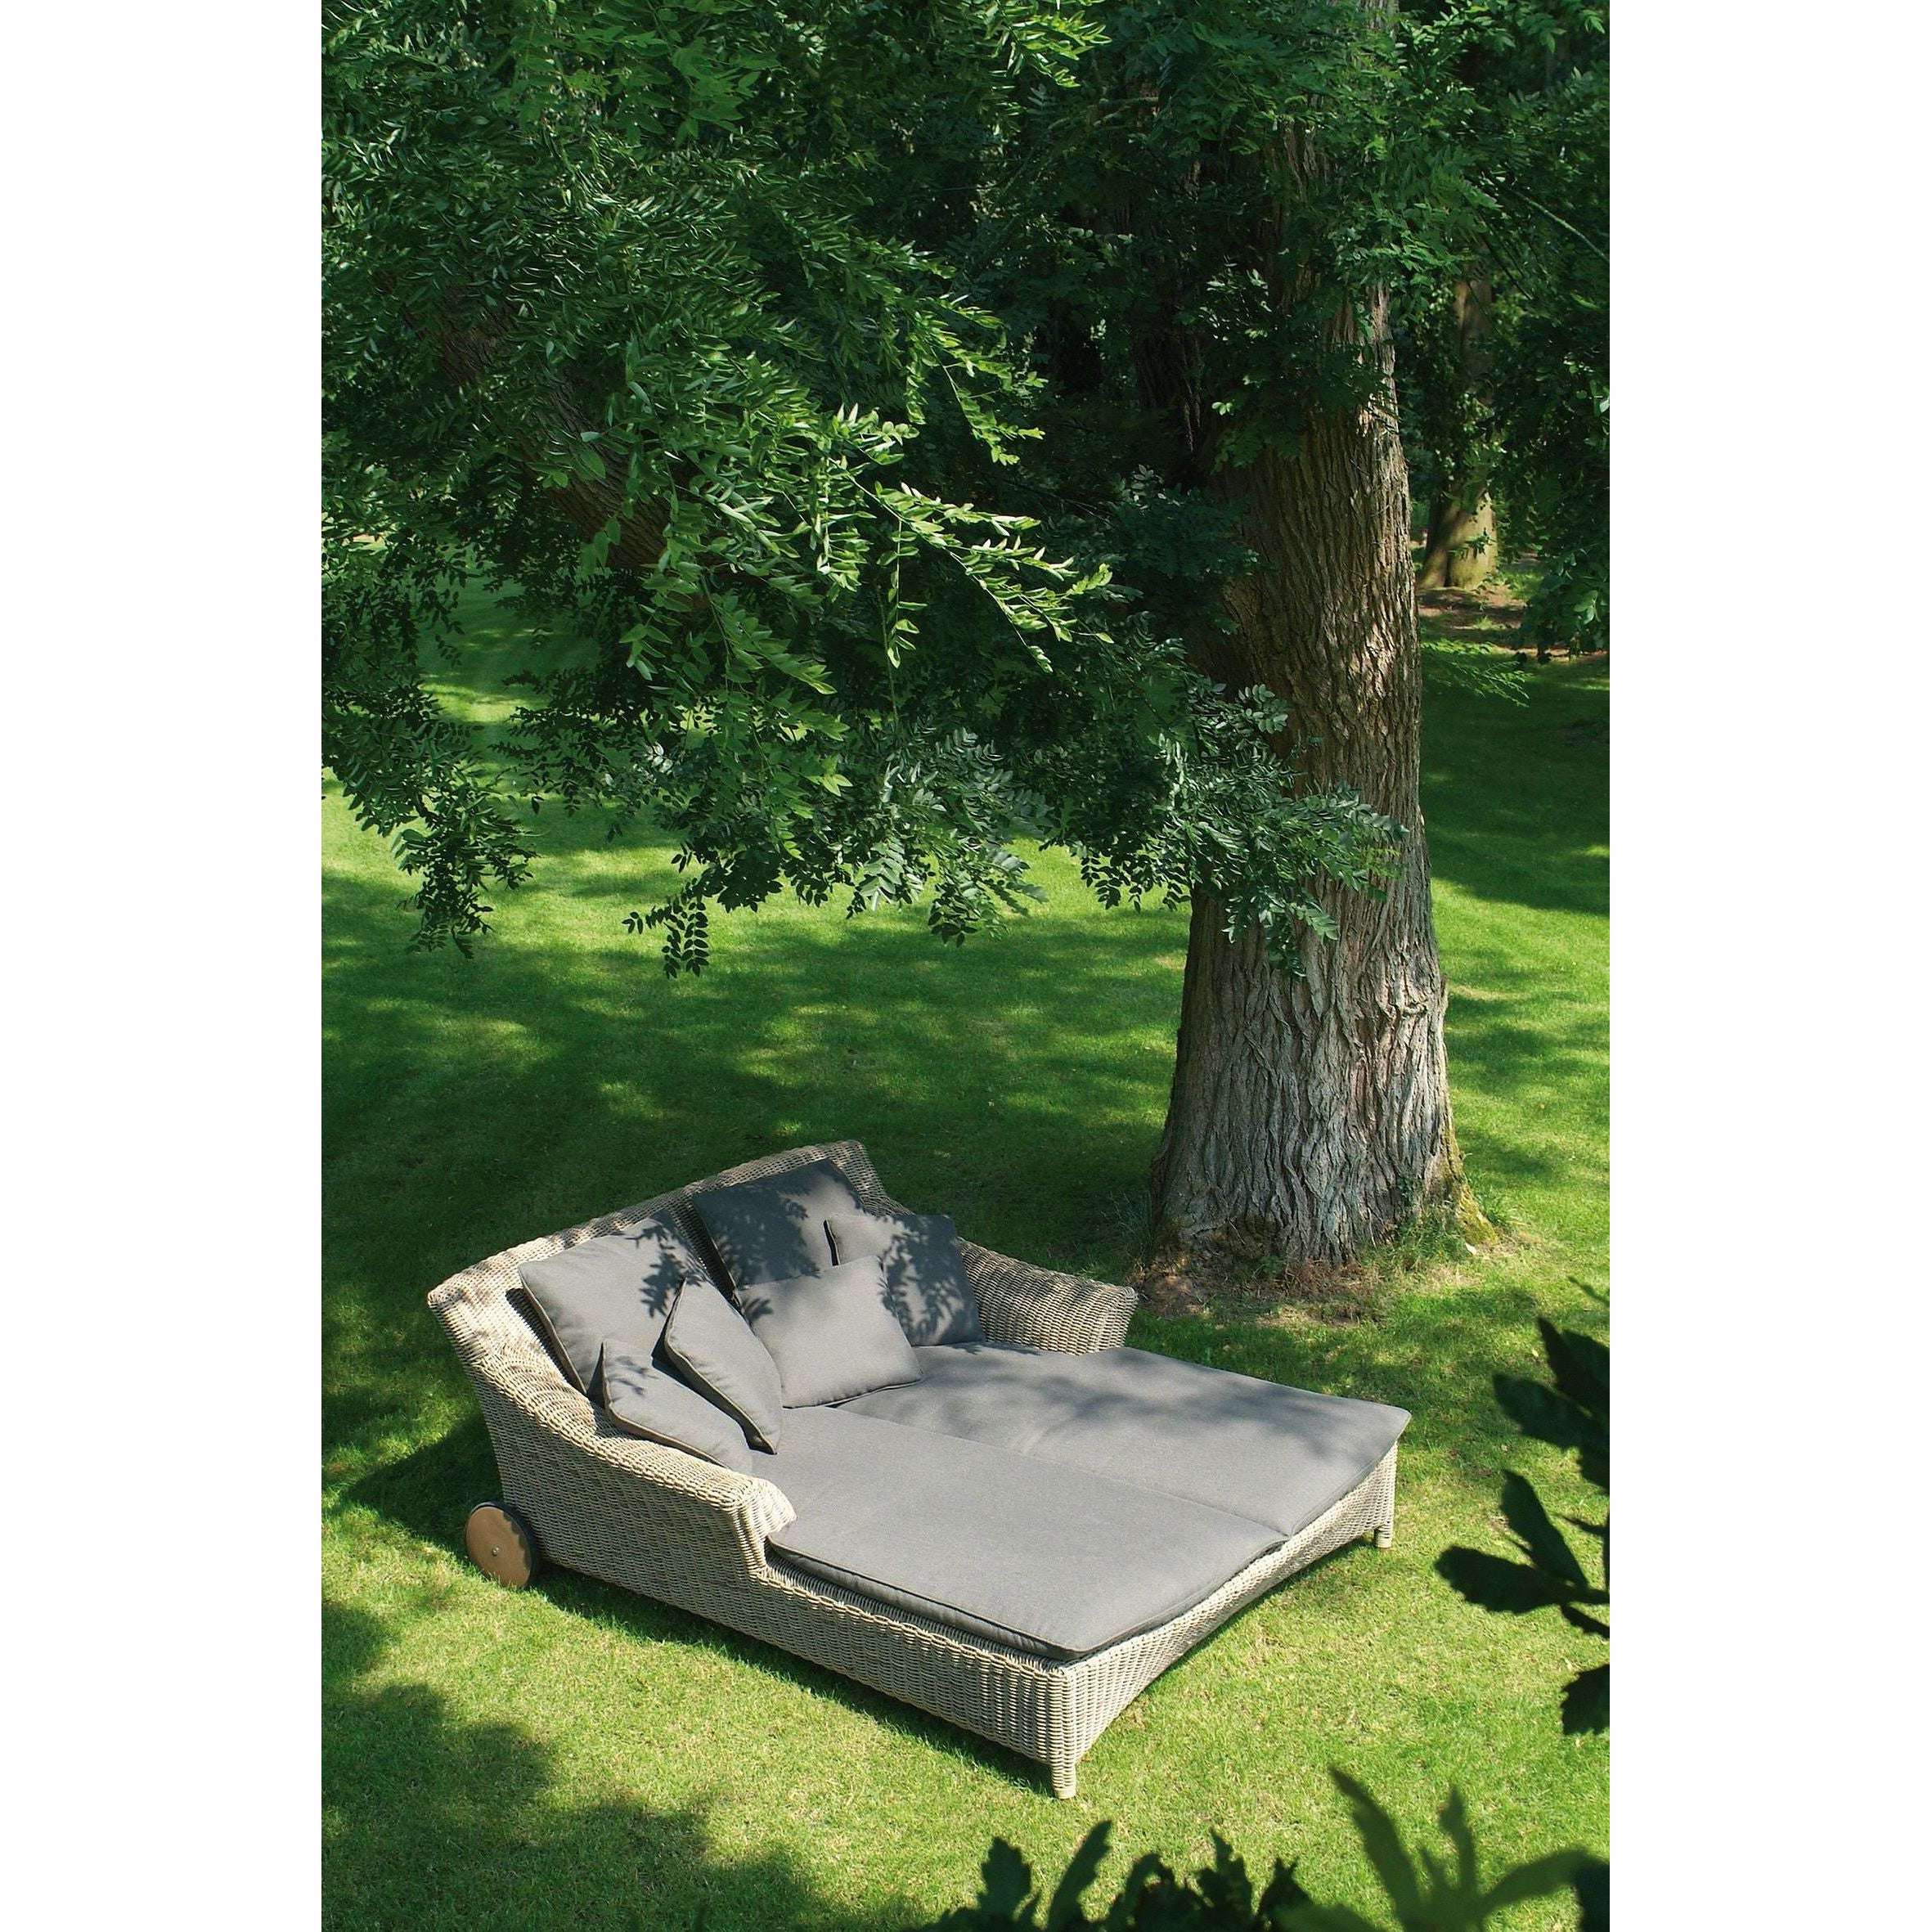 Exceptional Garden:4 Seasons Outdoor Valentine 2 Seater Sunbed with 7 Cushions